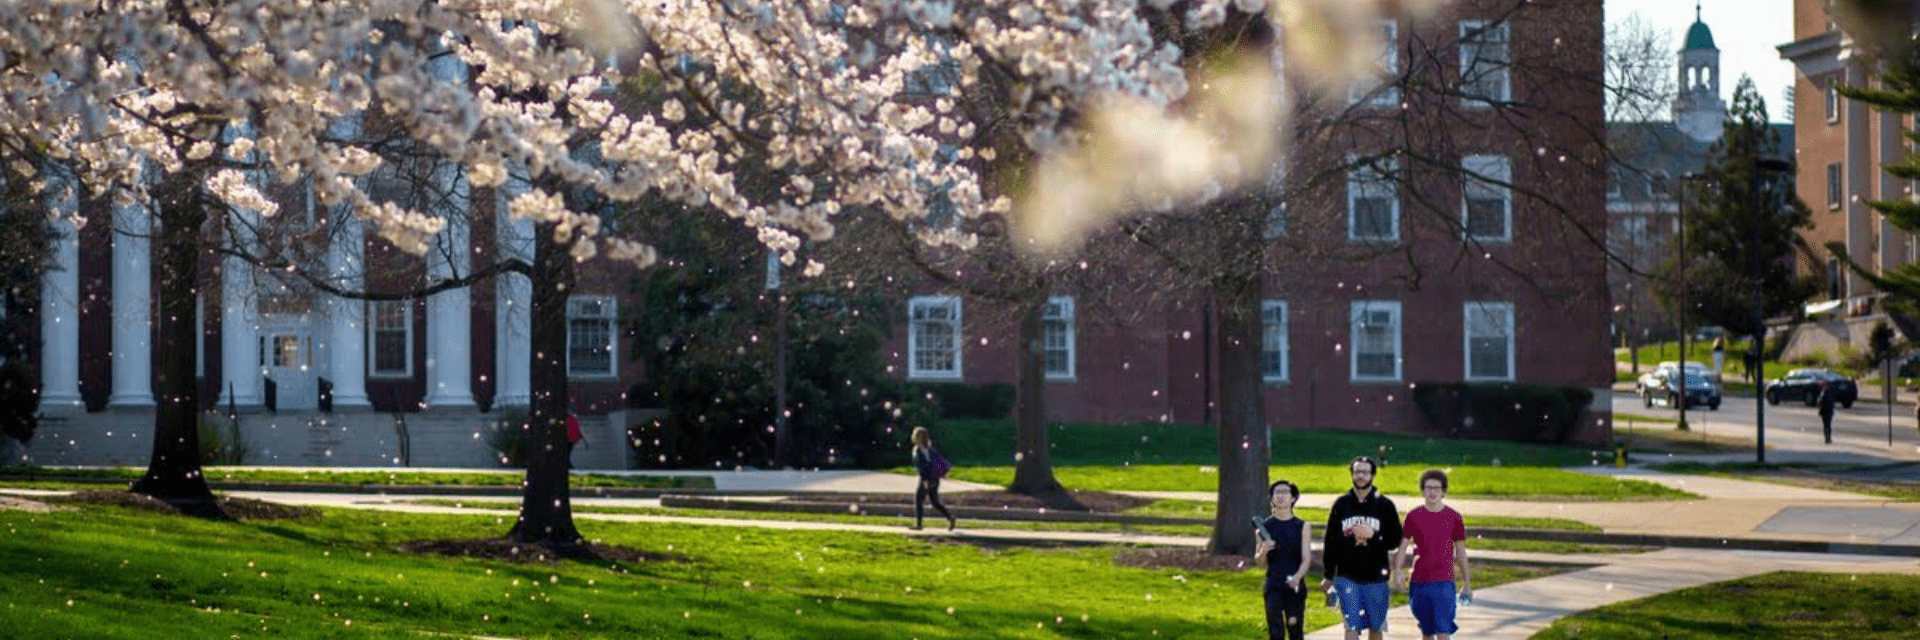 Students walking on campus with cherry blossoms